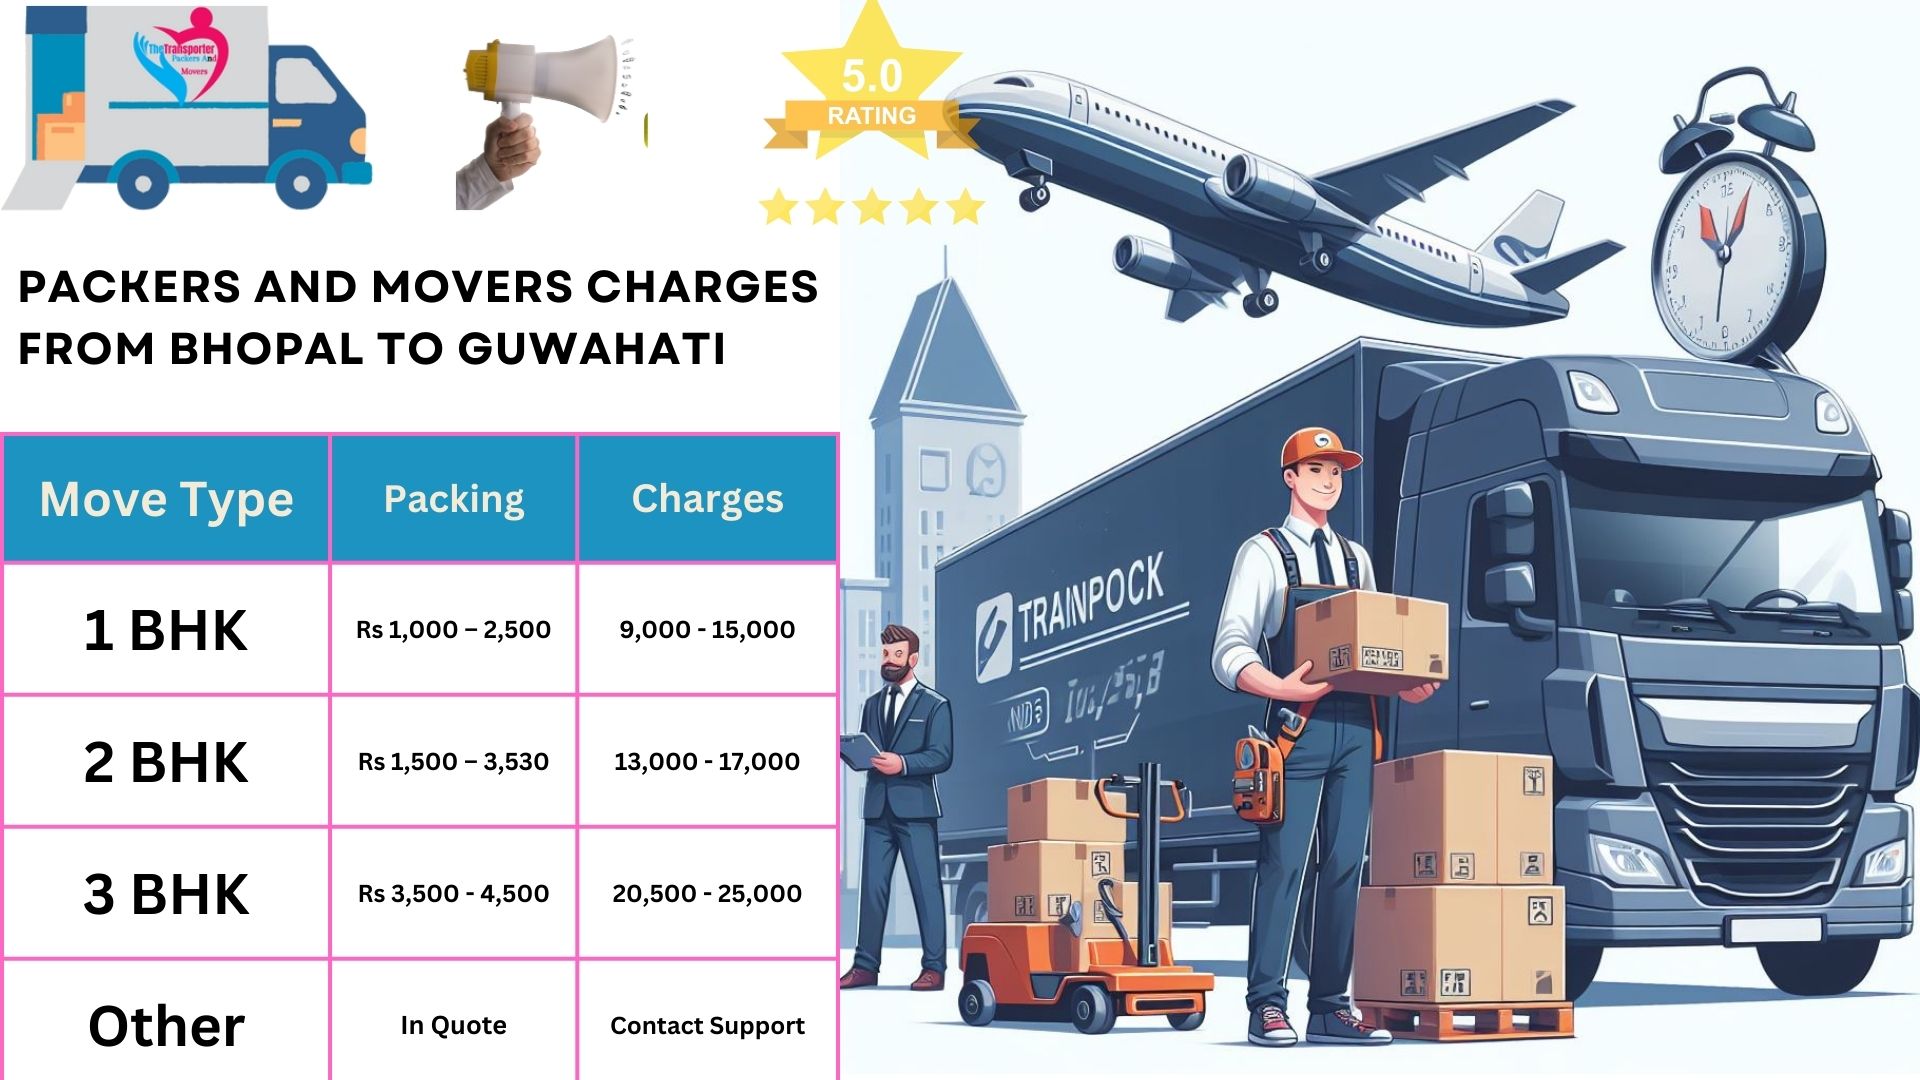 Packers and Movers charges list From Bhopal to Guwahati 